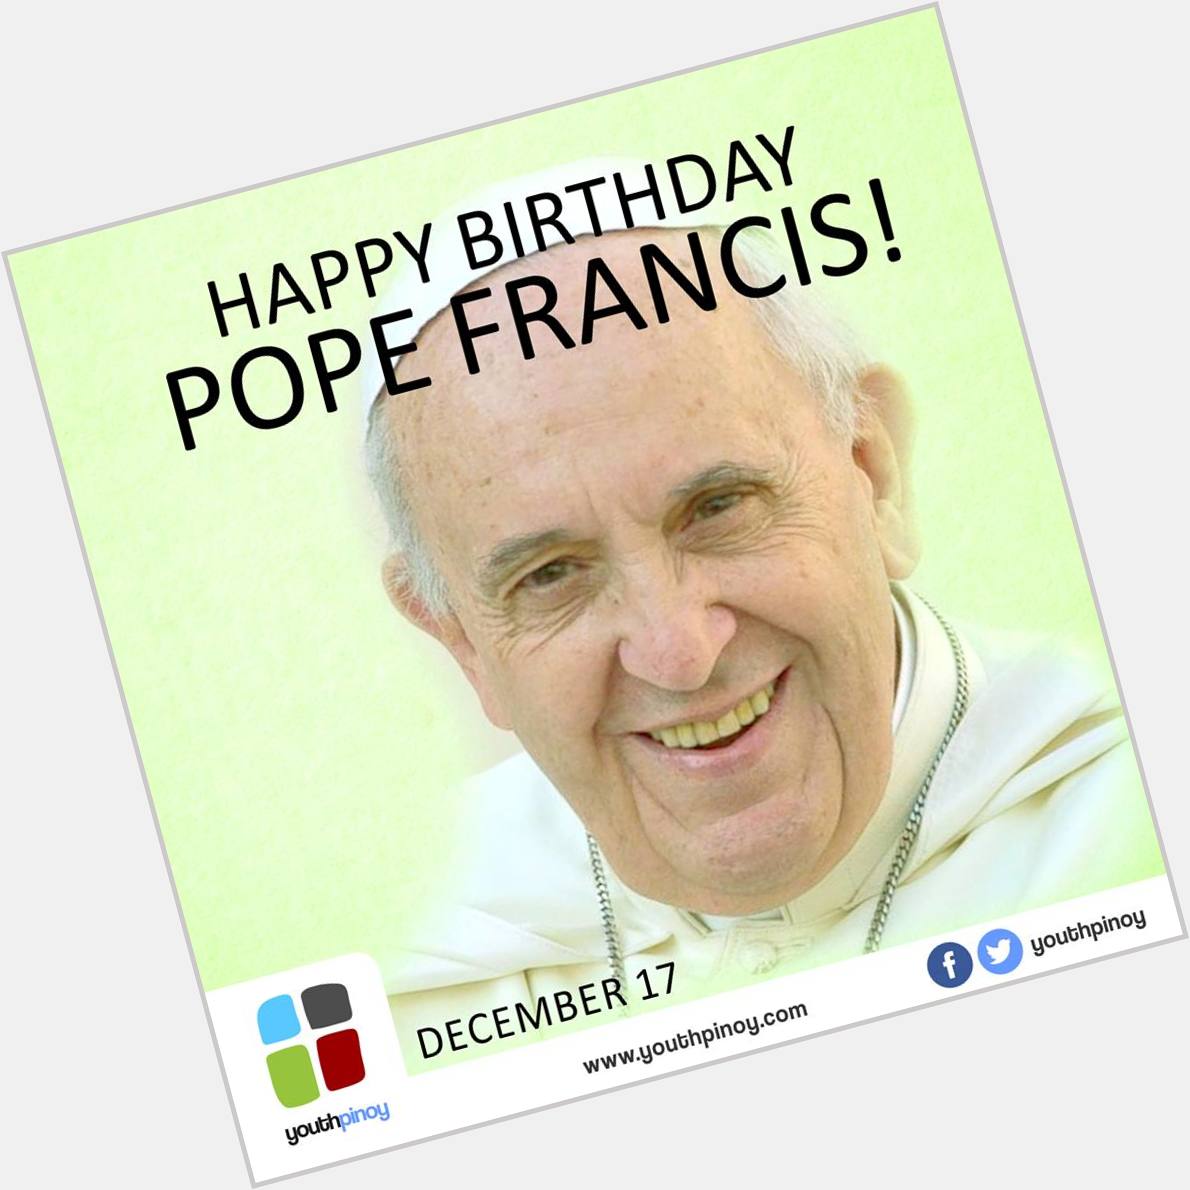 HAPPY BIRTHDAY TO POPE FRANCIS!!
See you next year in the World Meeting of Families!!  